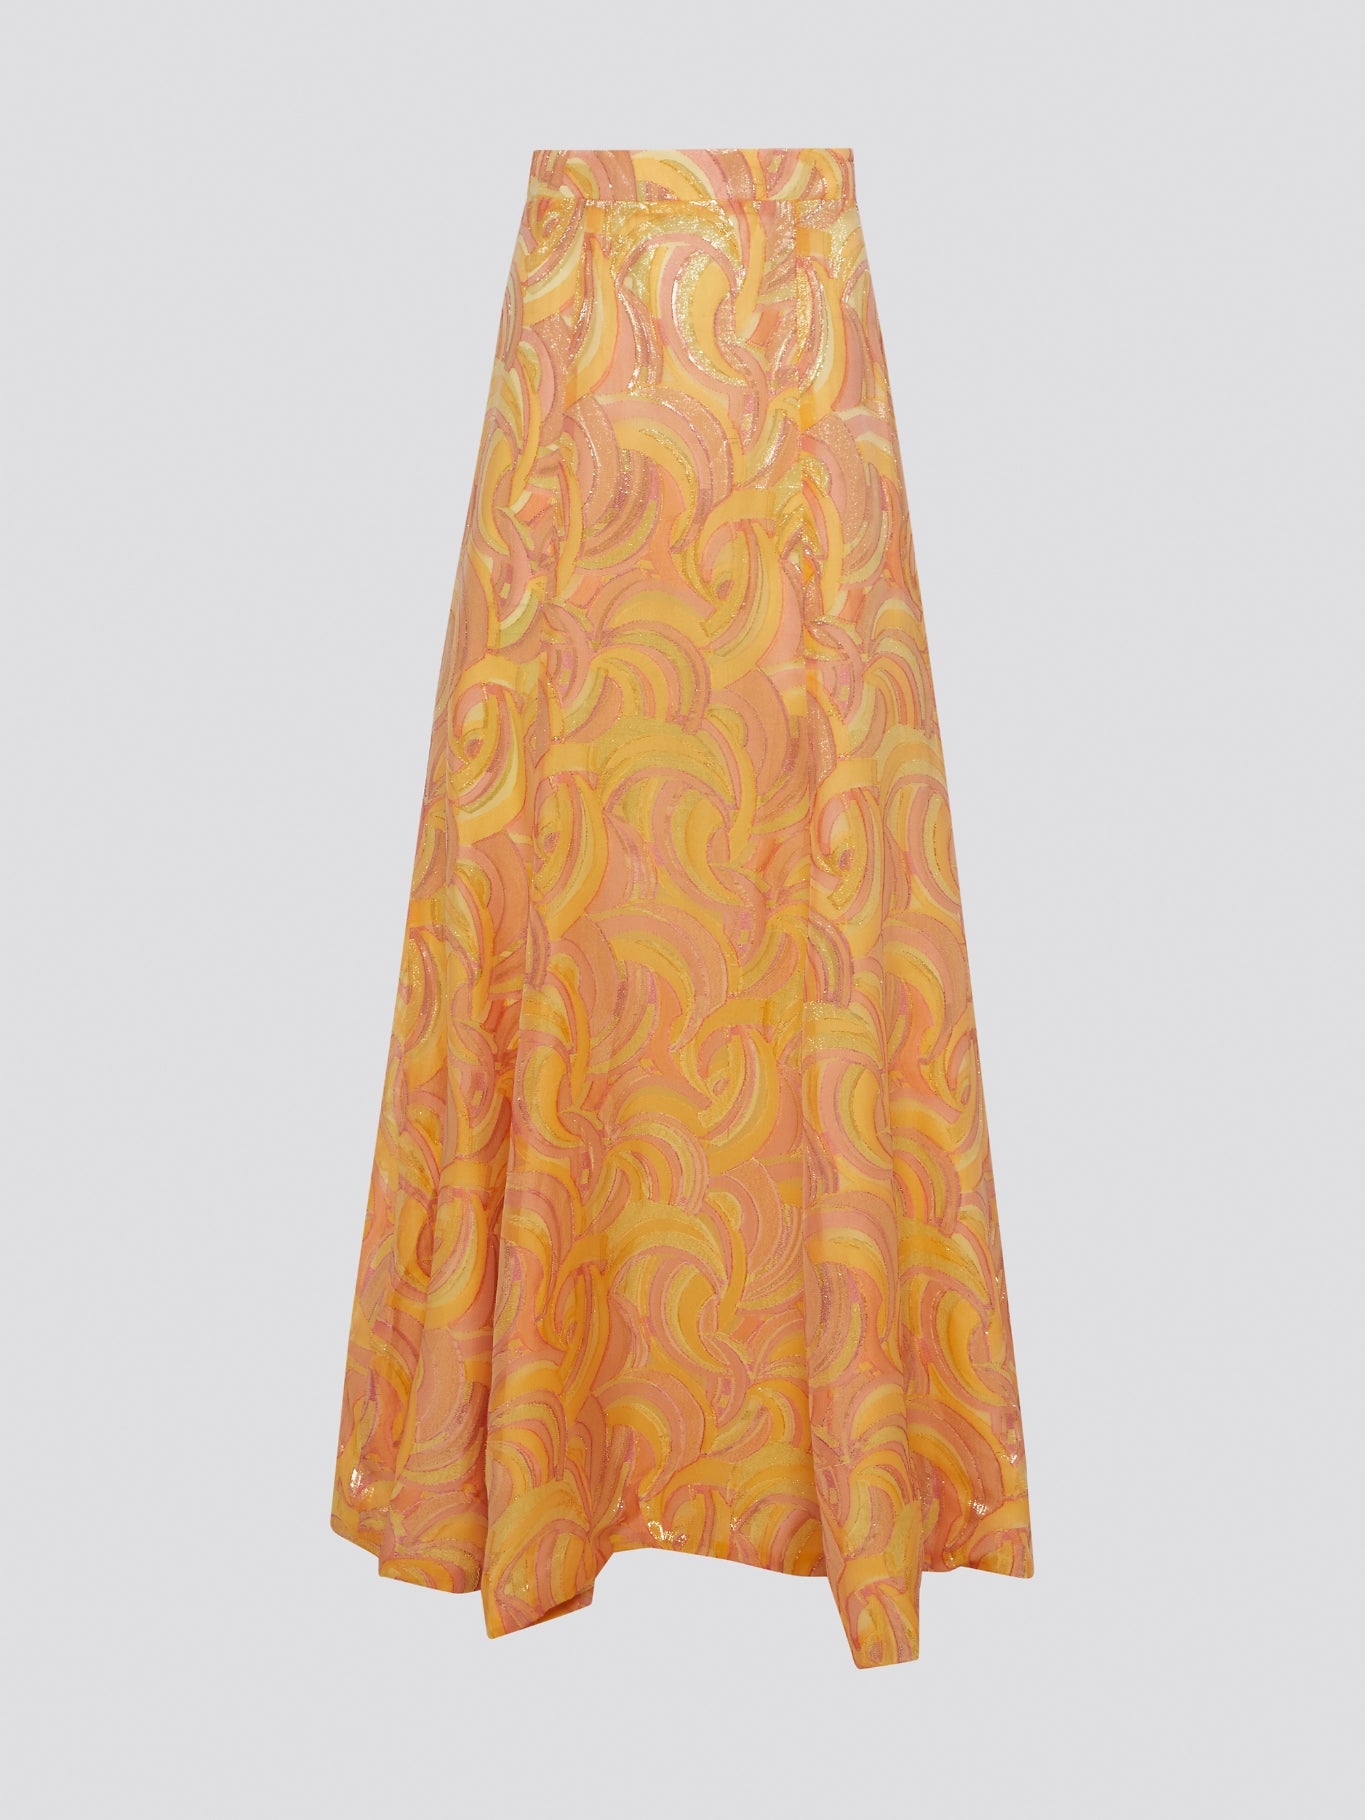 Make a statement with our Yellow Printed Maxi Skirt from Io Couture! The vibrant yellow hue combined with a fun, eye-catching print is sure to turn heads wherever you go. With its flowy silhouette and comfortable waistband, this skirt is perfect for both casual outings and special occasions. Elevate your wardrobe with this must-have piece from Io Couture!